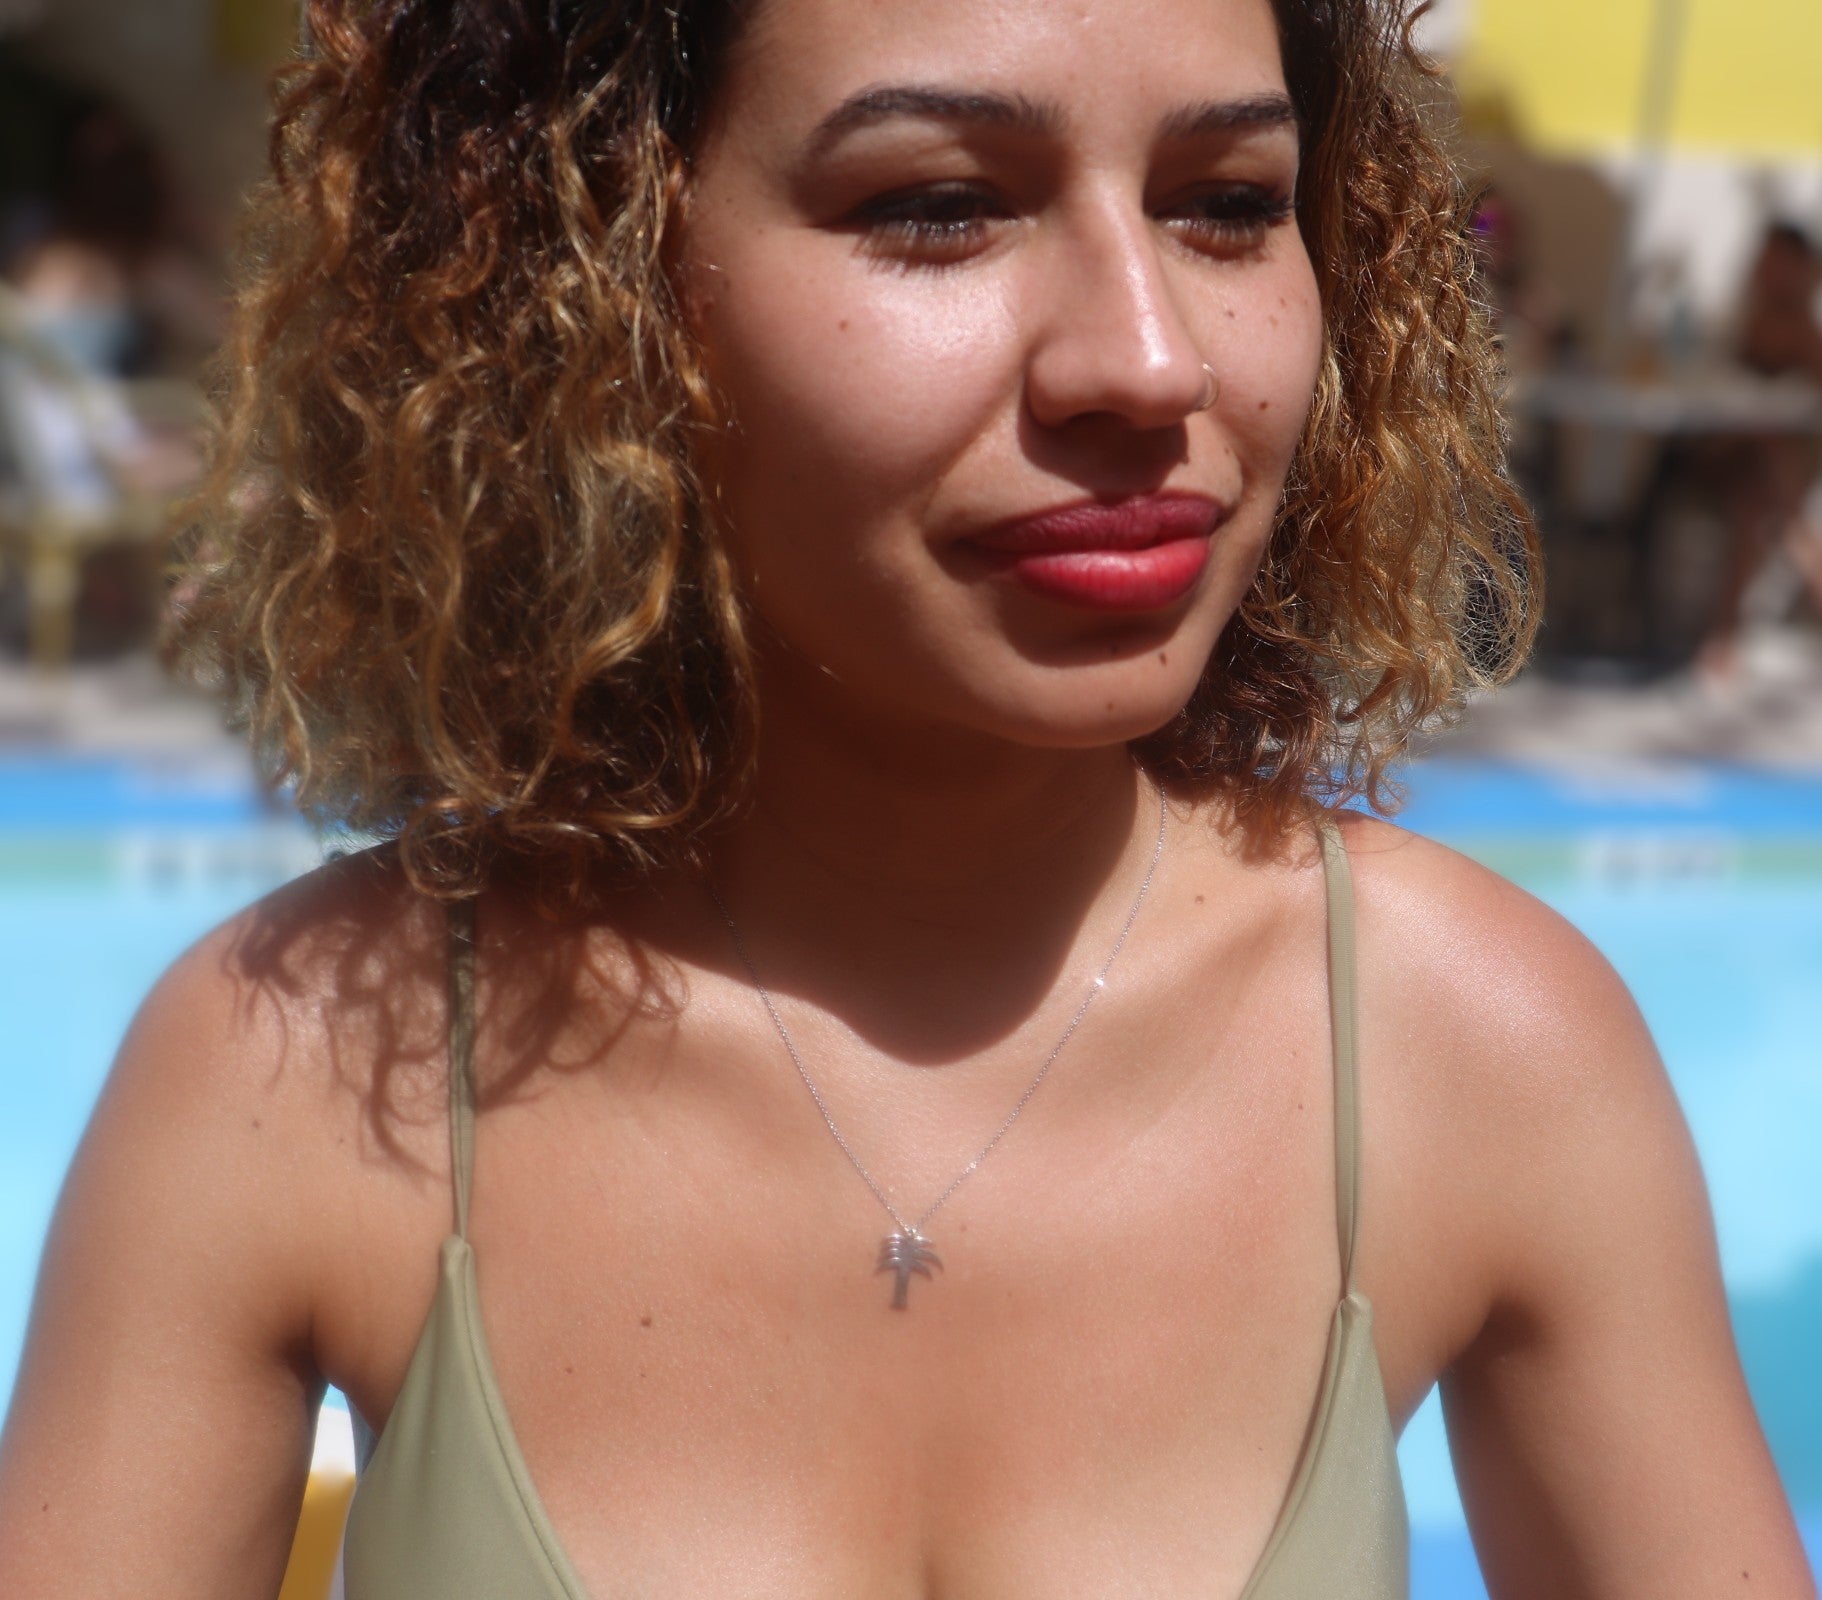 woman at pool with shoulder length curly hair and wearing a green bikini and a mini palm tree necklace